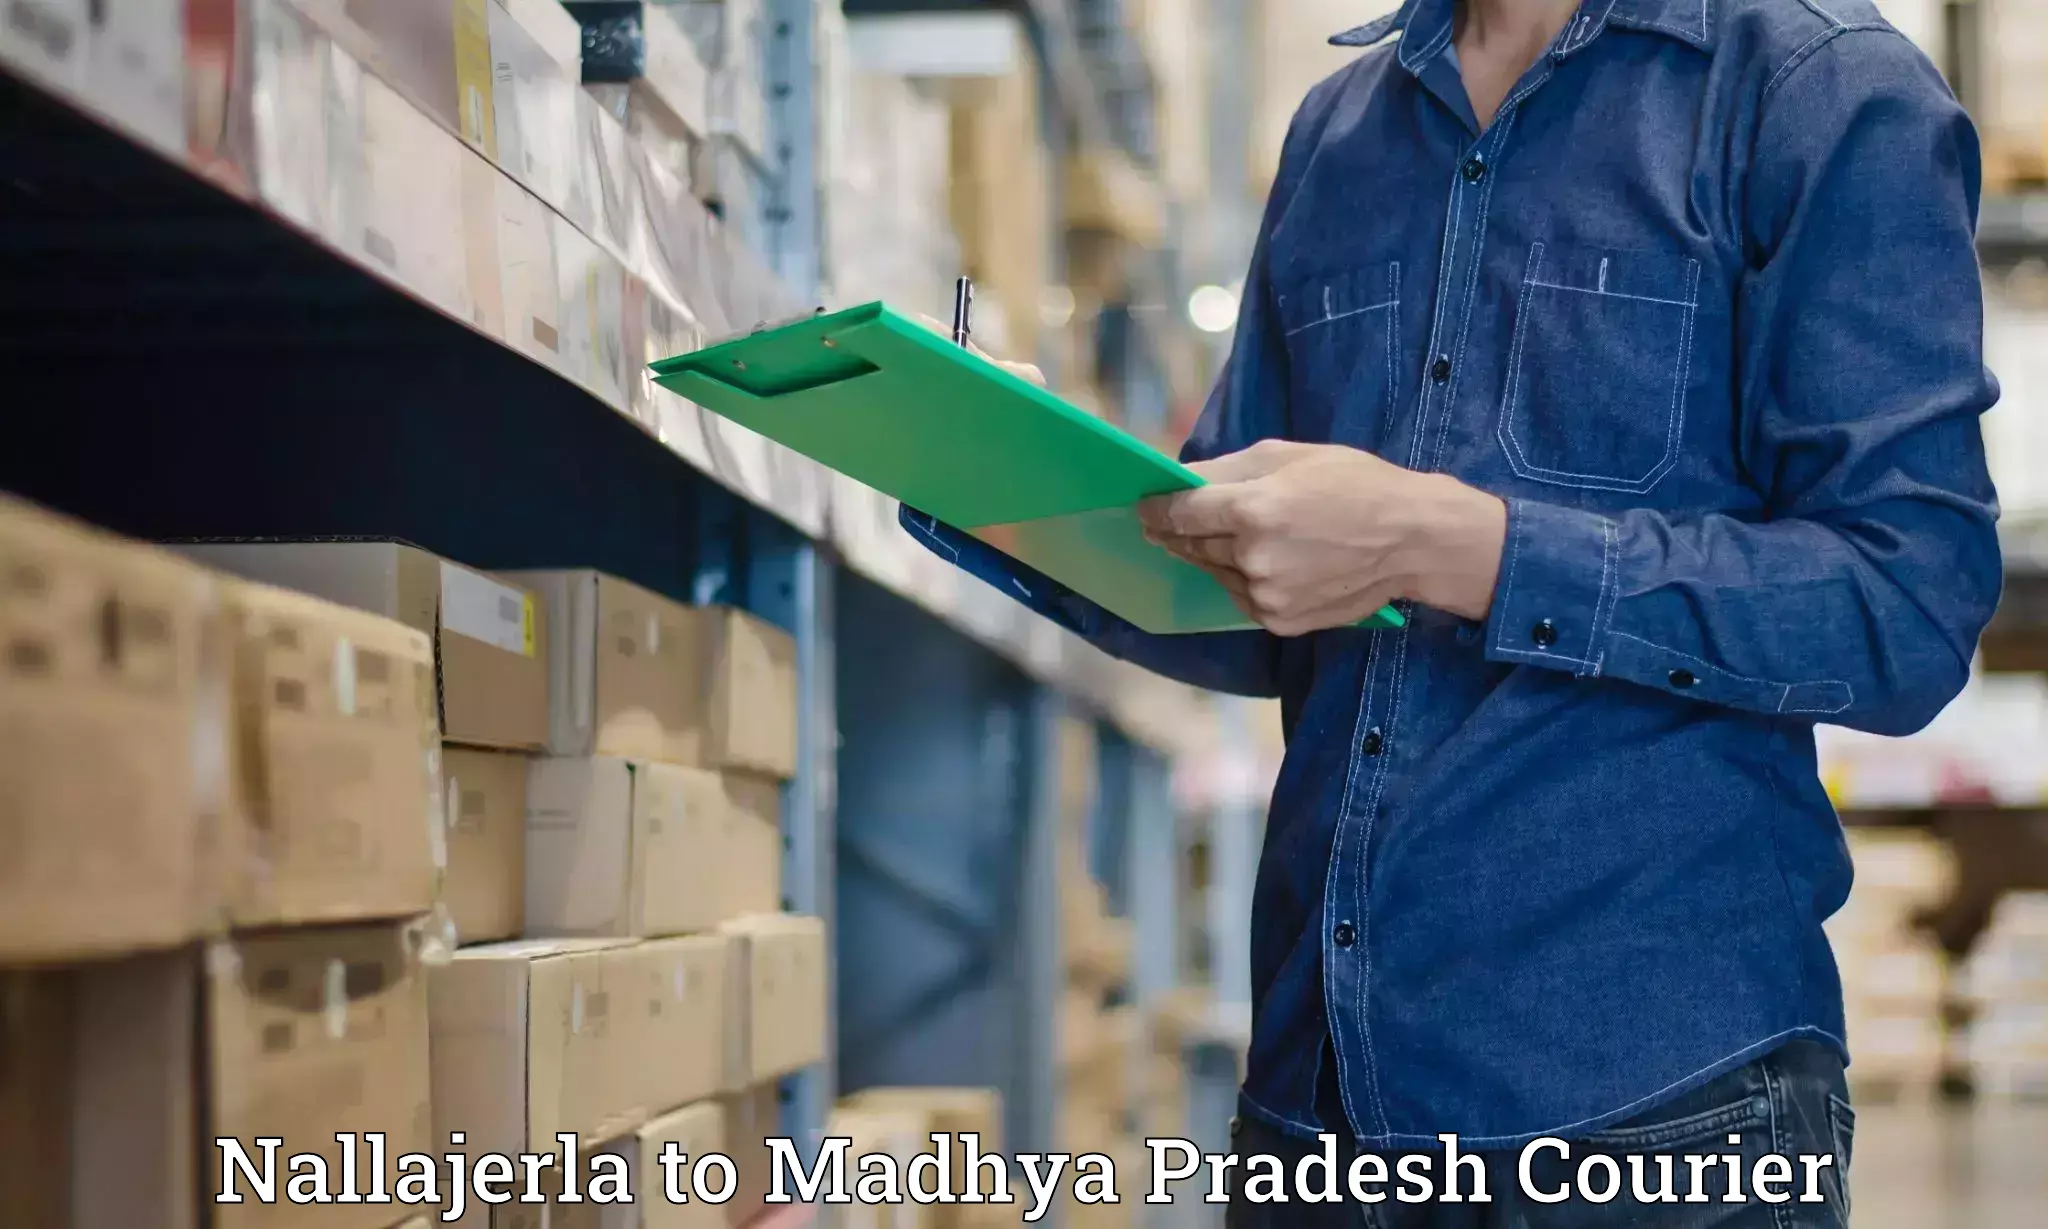 Quick courier services in Nallajerla to Gwalior